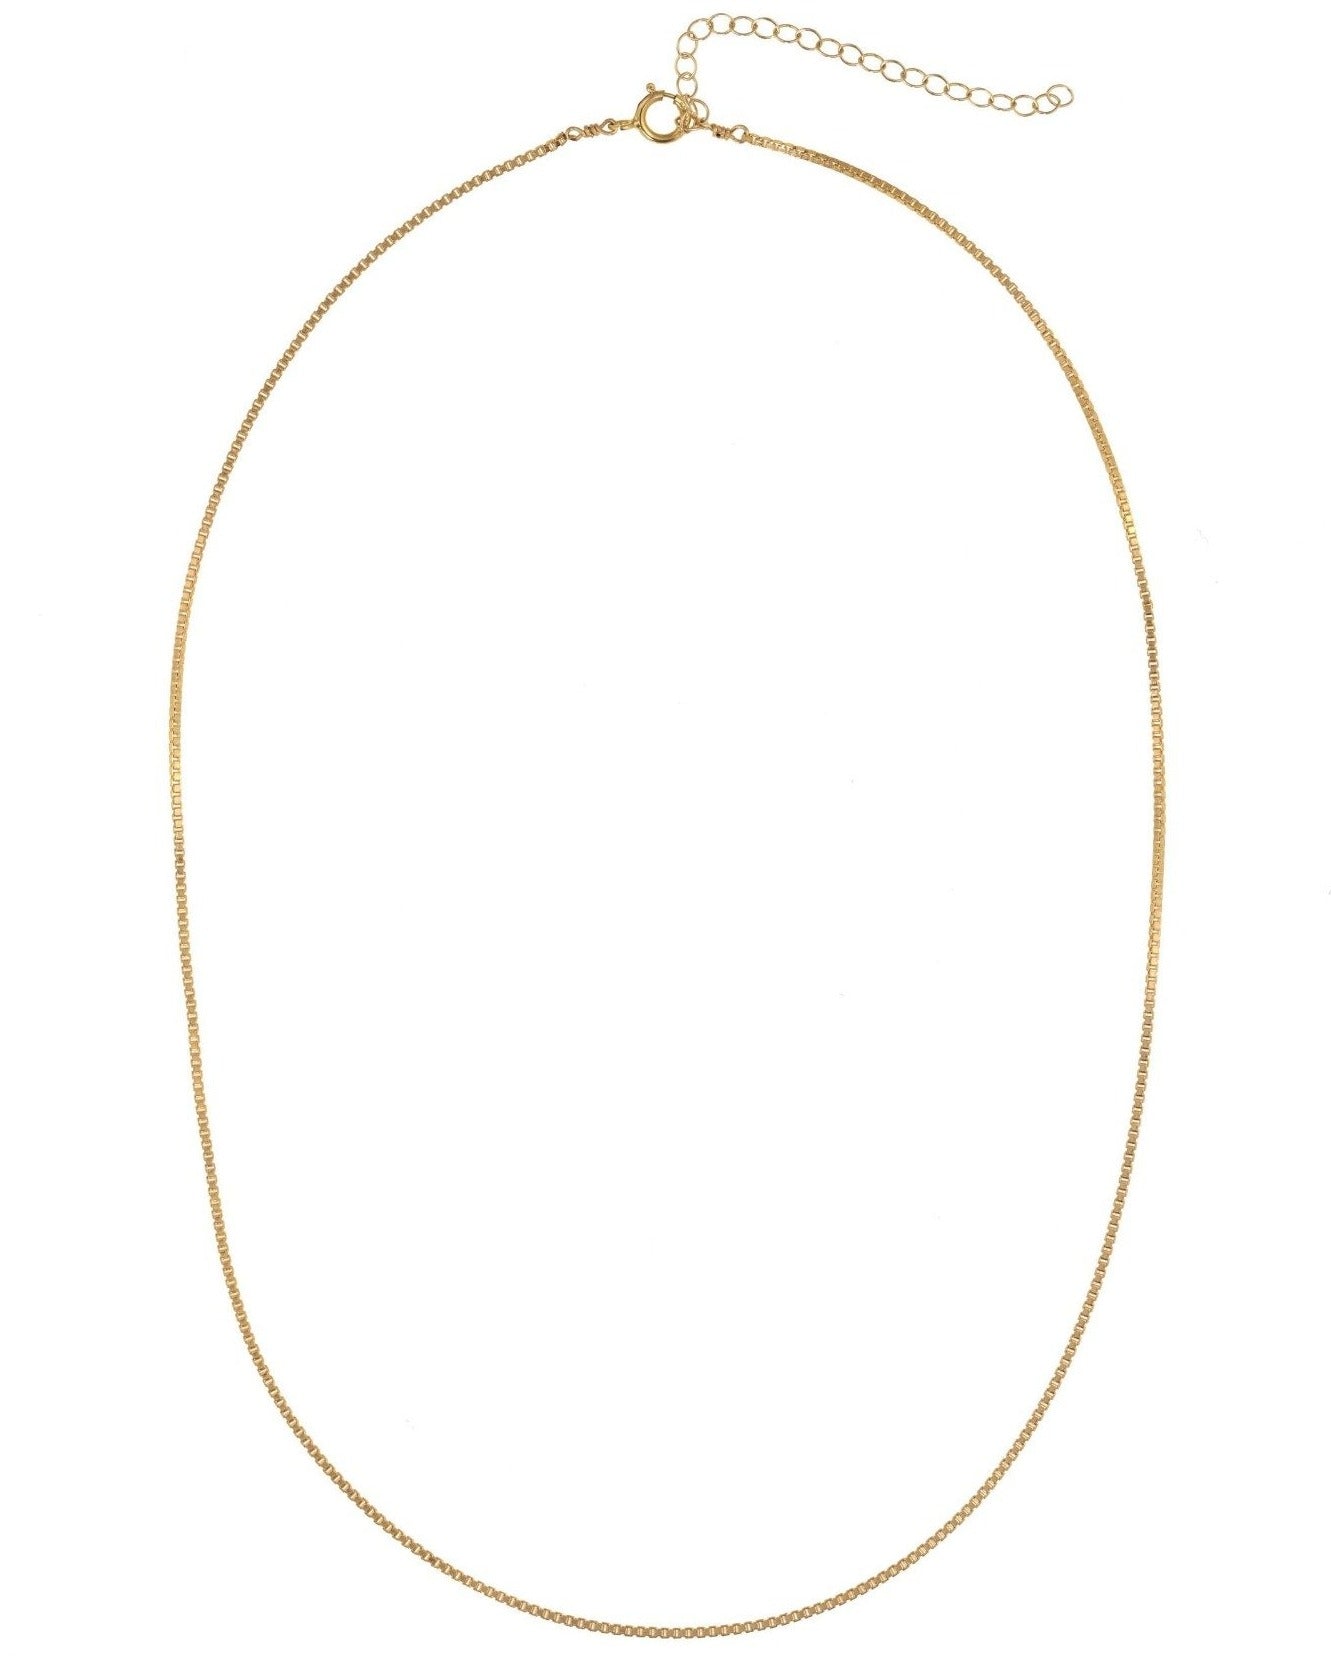 Kita Necklace by KOZAKH. A 14 to 16 inch adjustable length, 3mm thick box chain necklace in 14K Gold Filled.